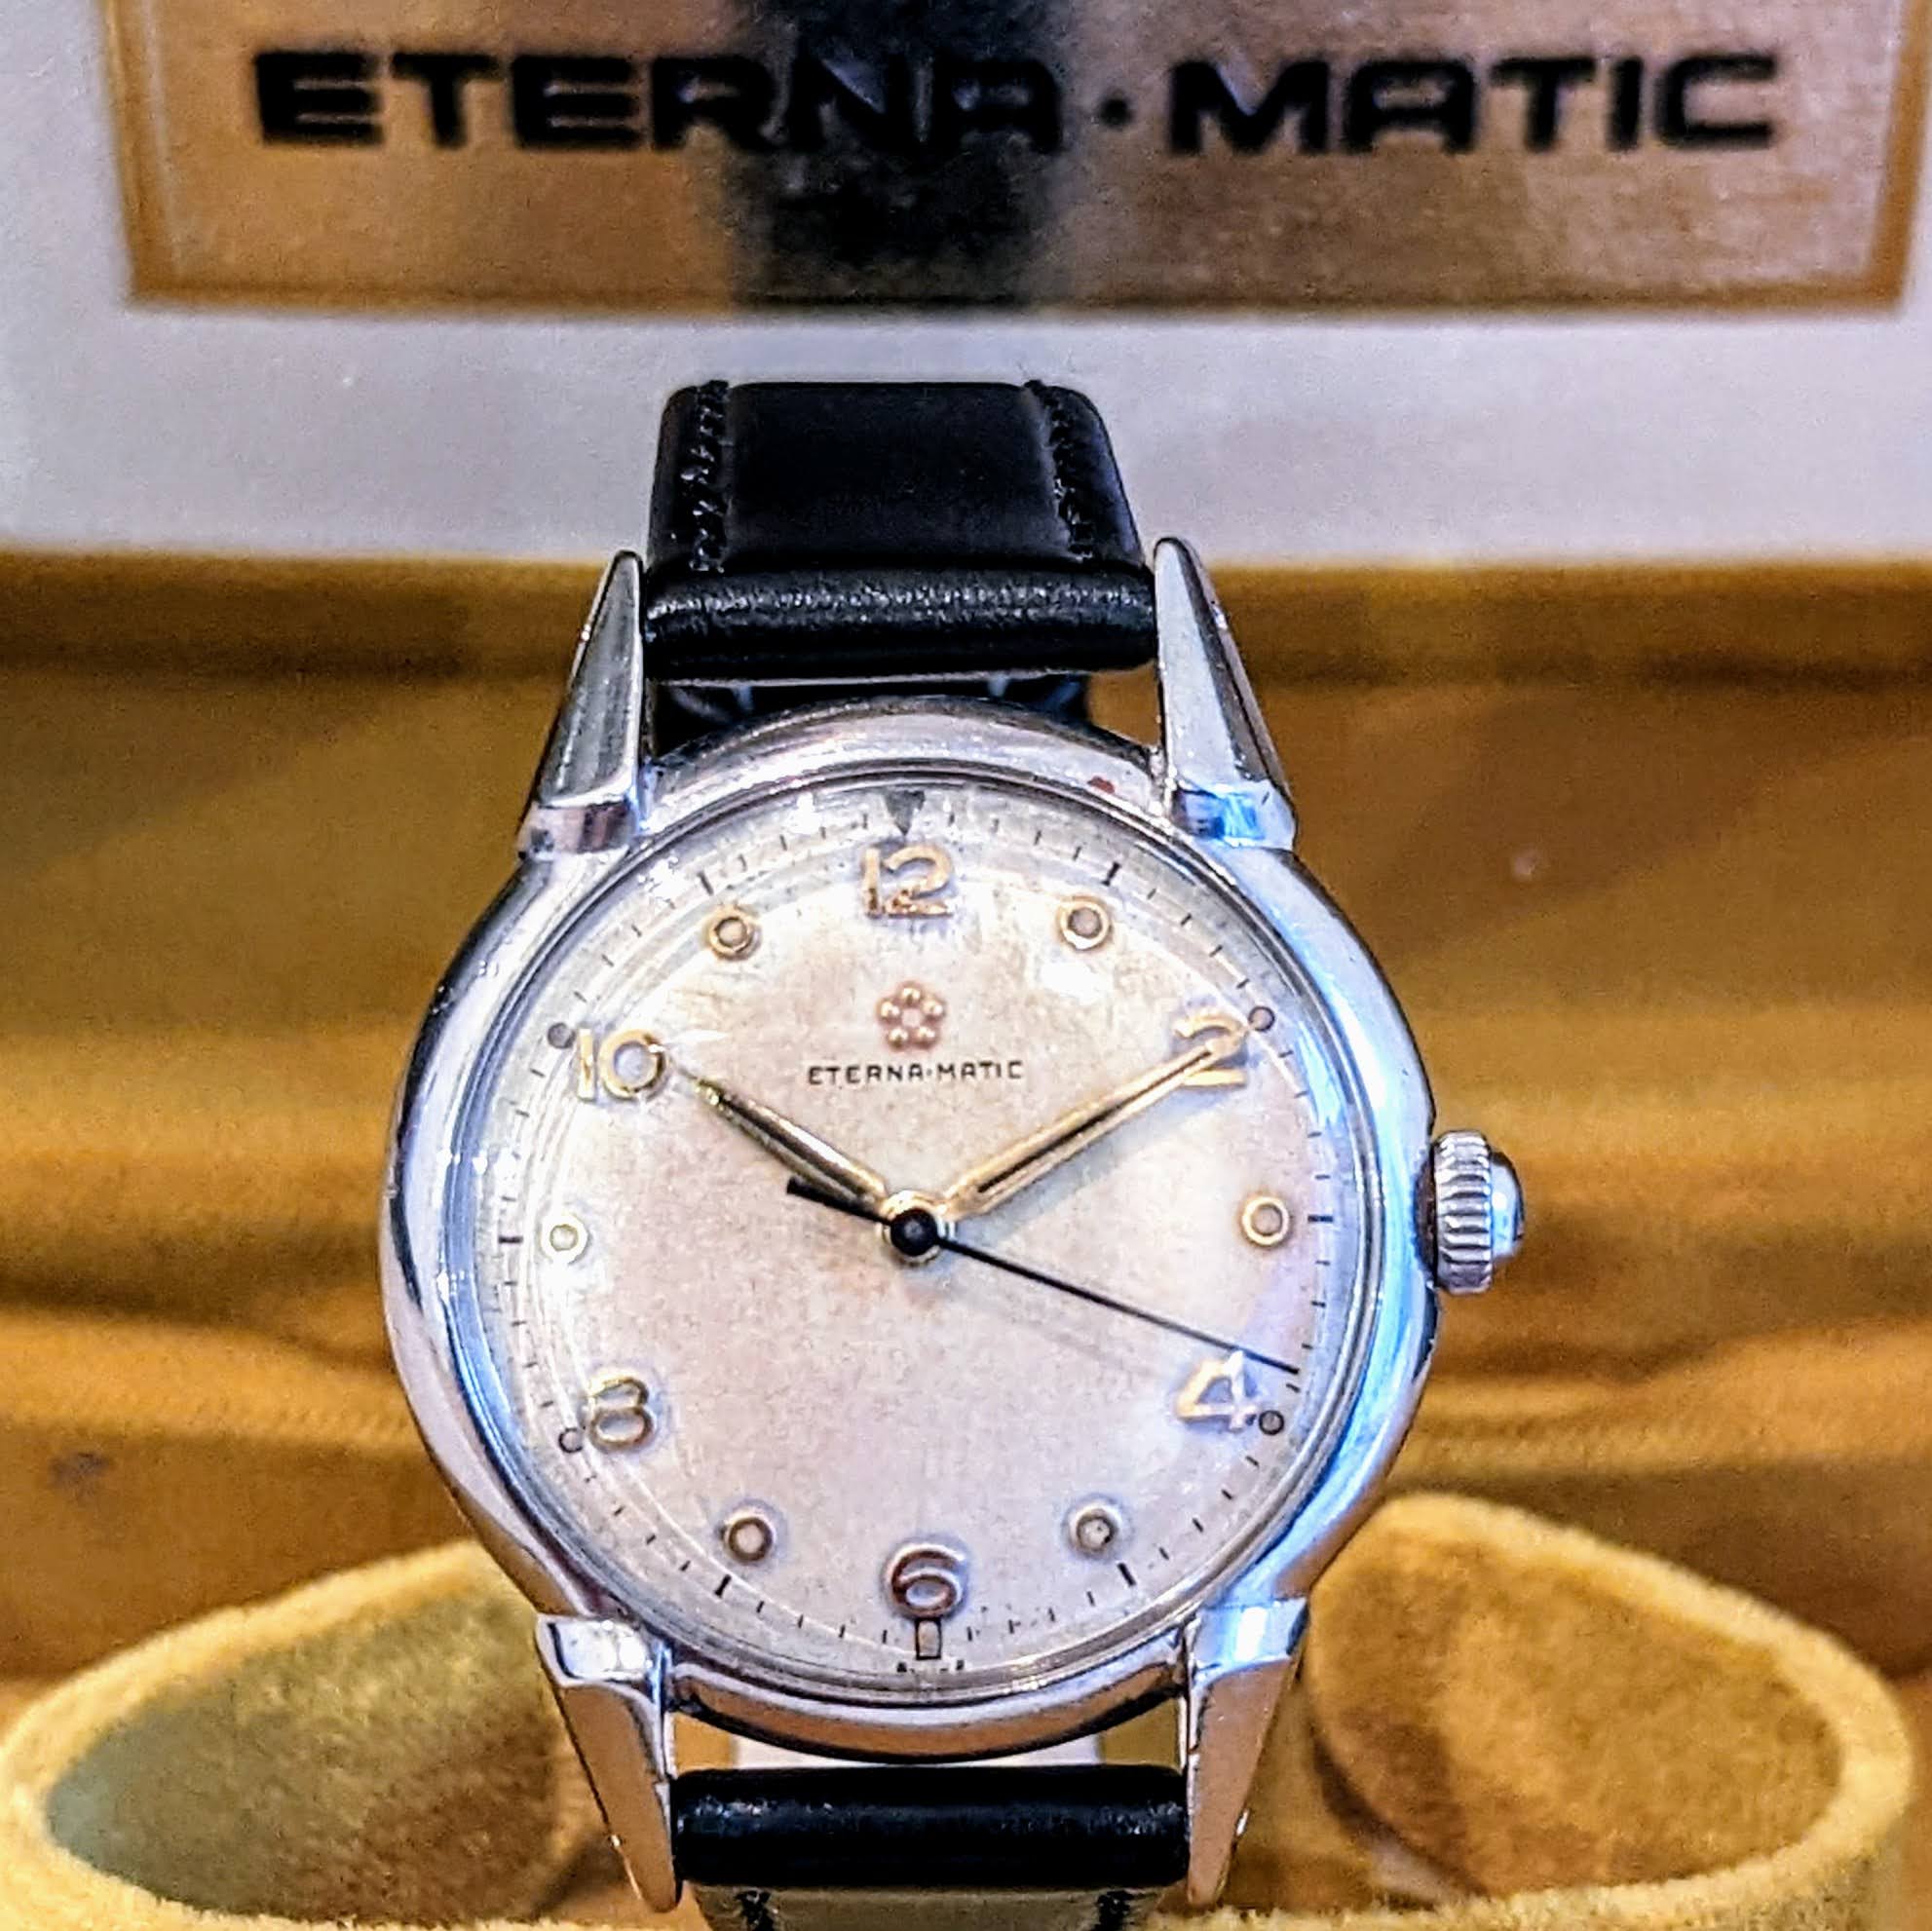 1950s ETERNA-MATIC Watch Vintage Automatic Wristwatch Fancy Lugs! - Box + Papers!